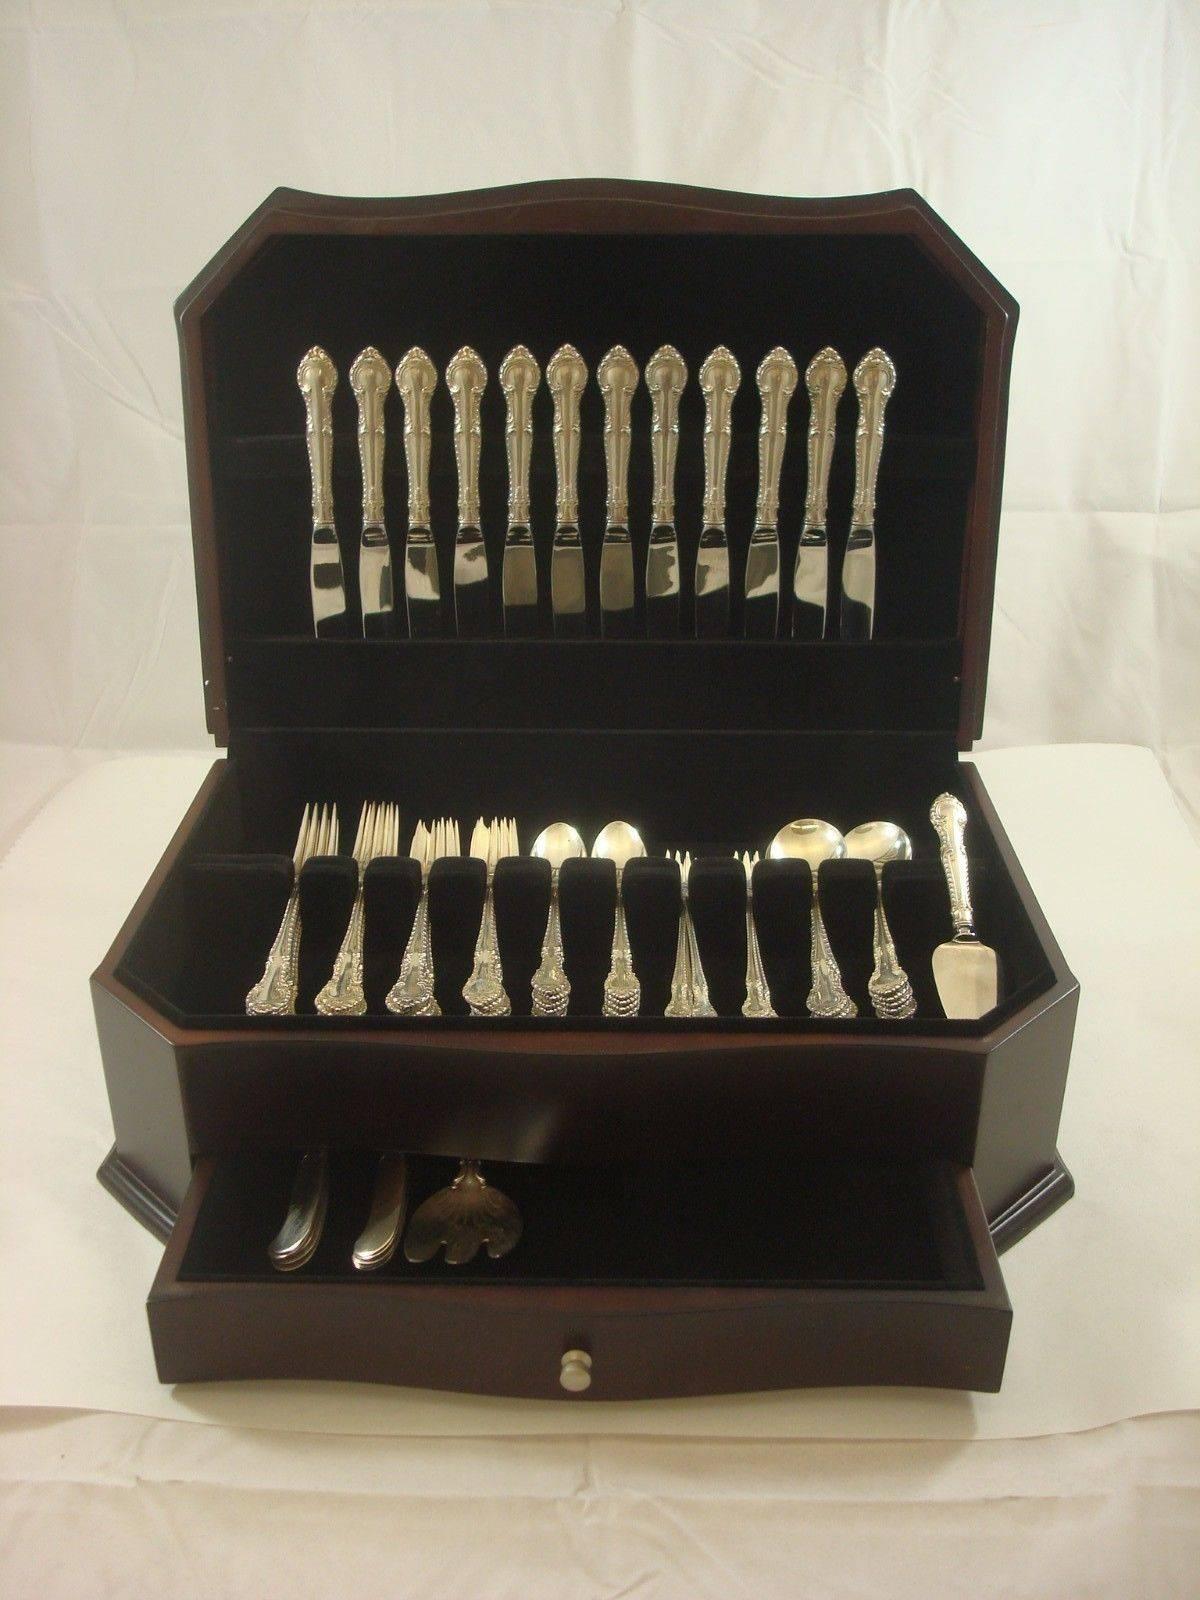 English Gadroon by Gorham sterling silver flatware set, 86 Pieces. This set includes: 

12 knives, 8 7/8